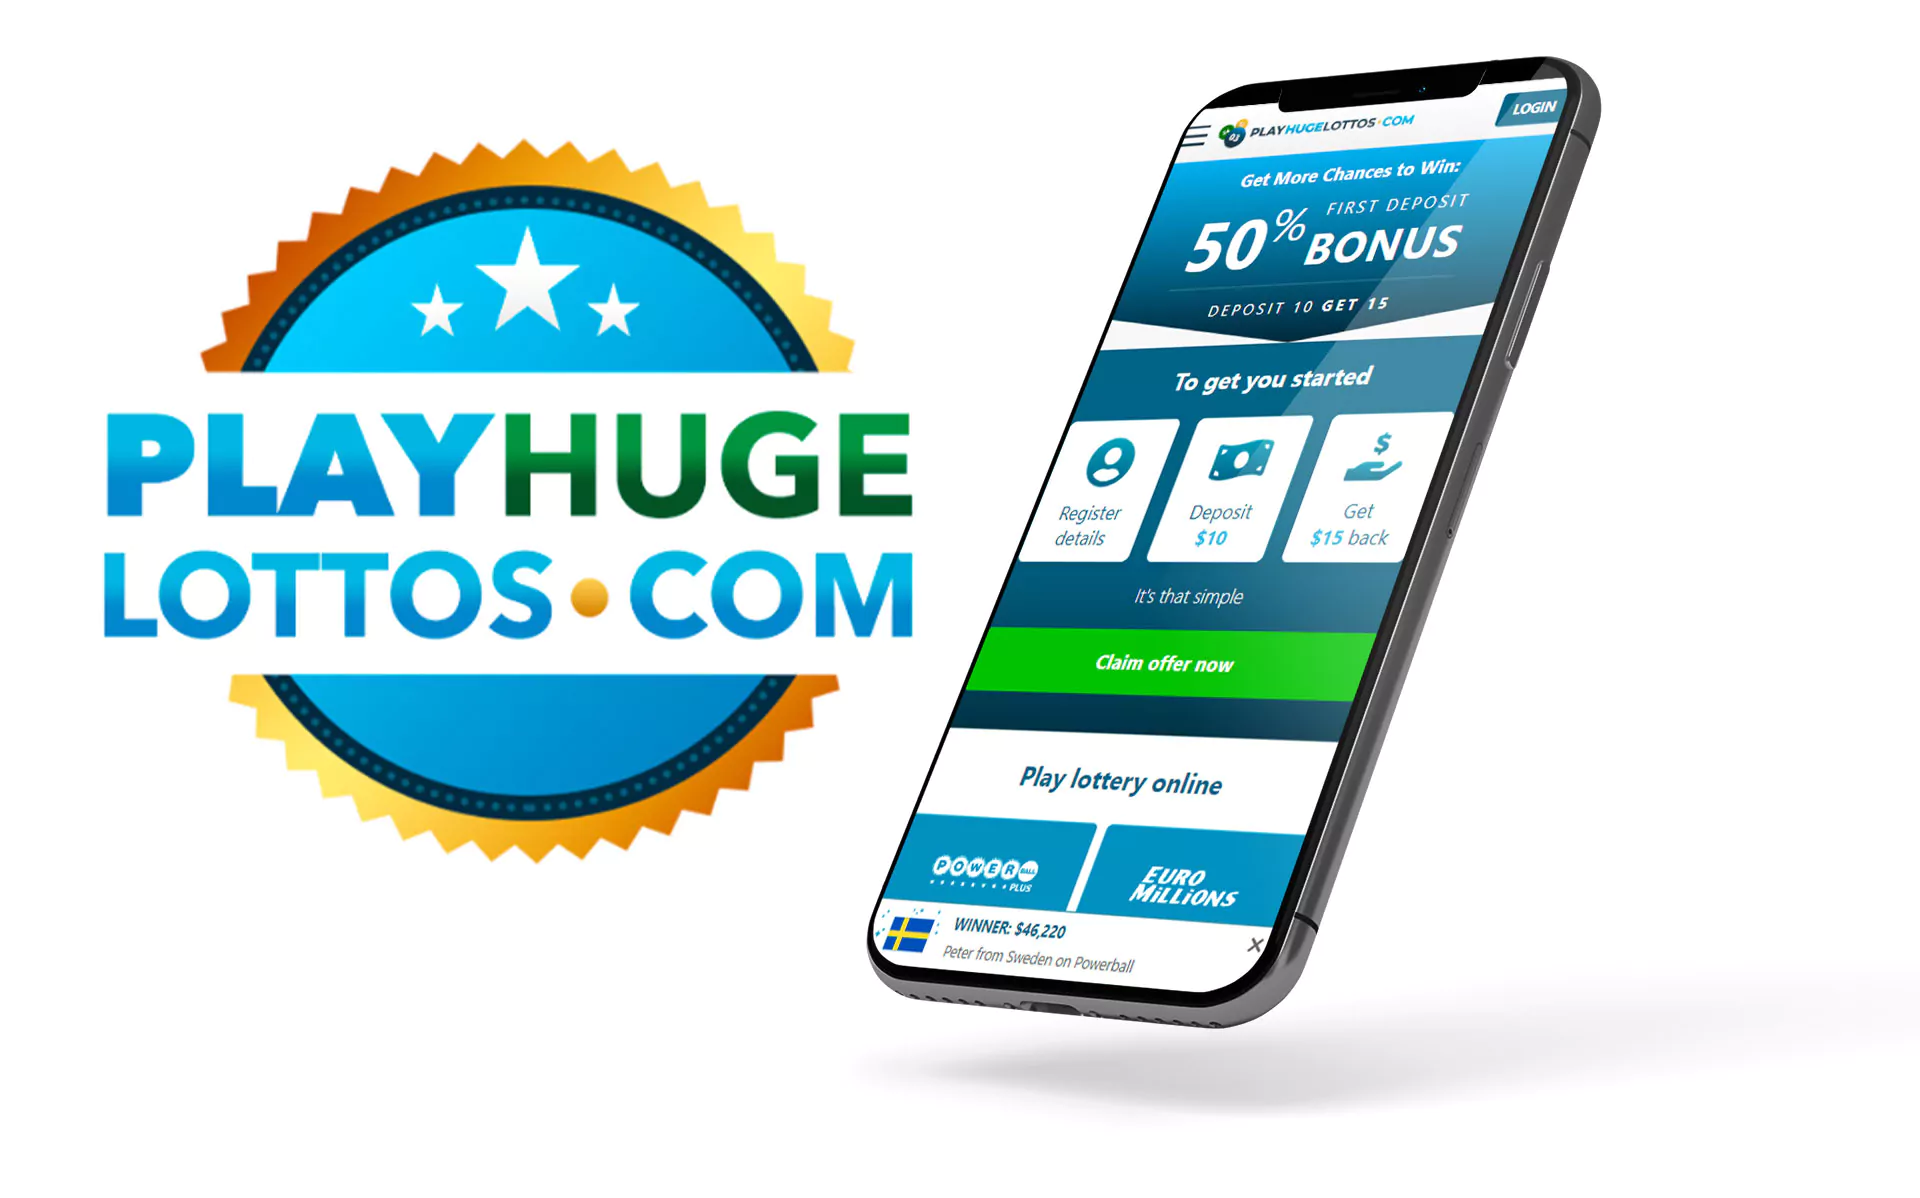 Download the app to play online lotteries.